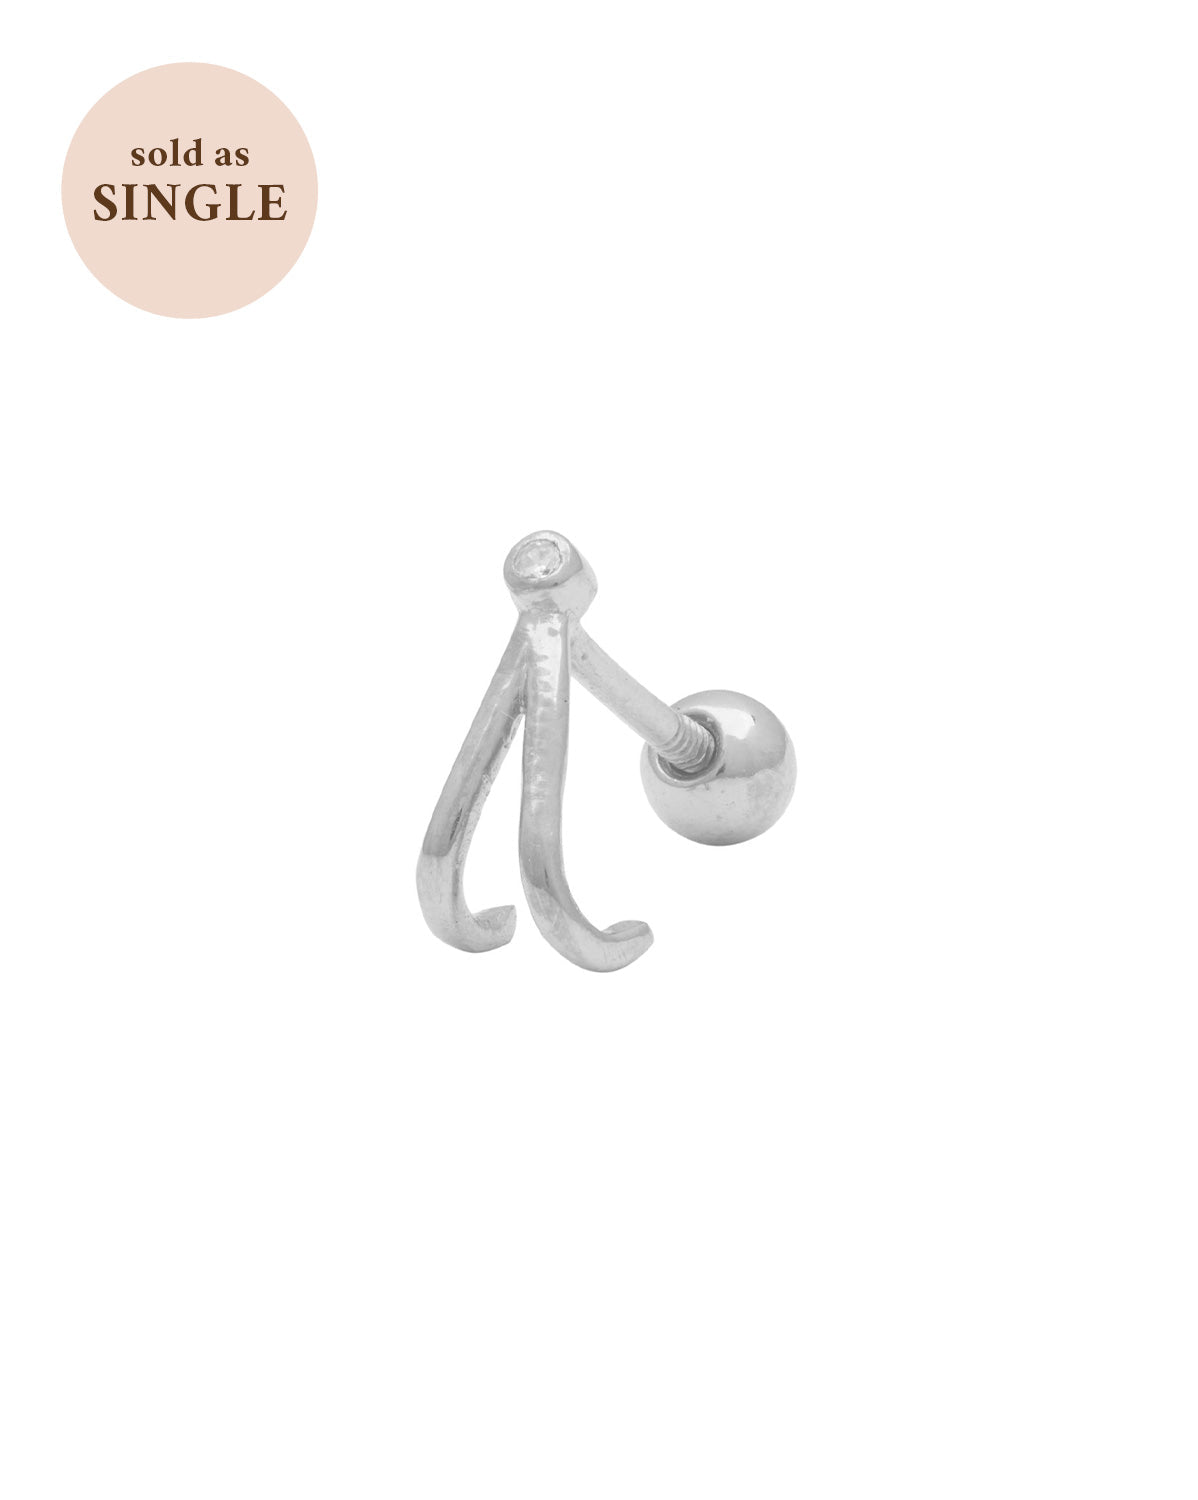 Womens Elegant Tassel Body Chain Gold/Silver Color Nipple Ring With  Connecting Chain Sexy Non Piercing Clip Jewelry From Bong05, $9.75 |  DHgate.Com